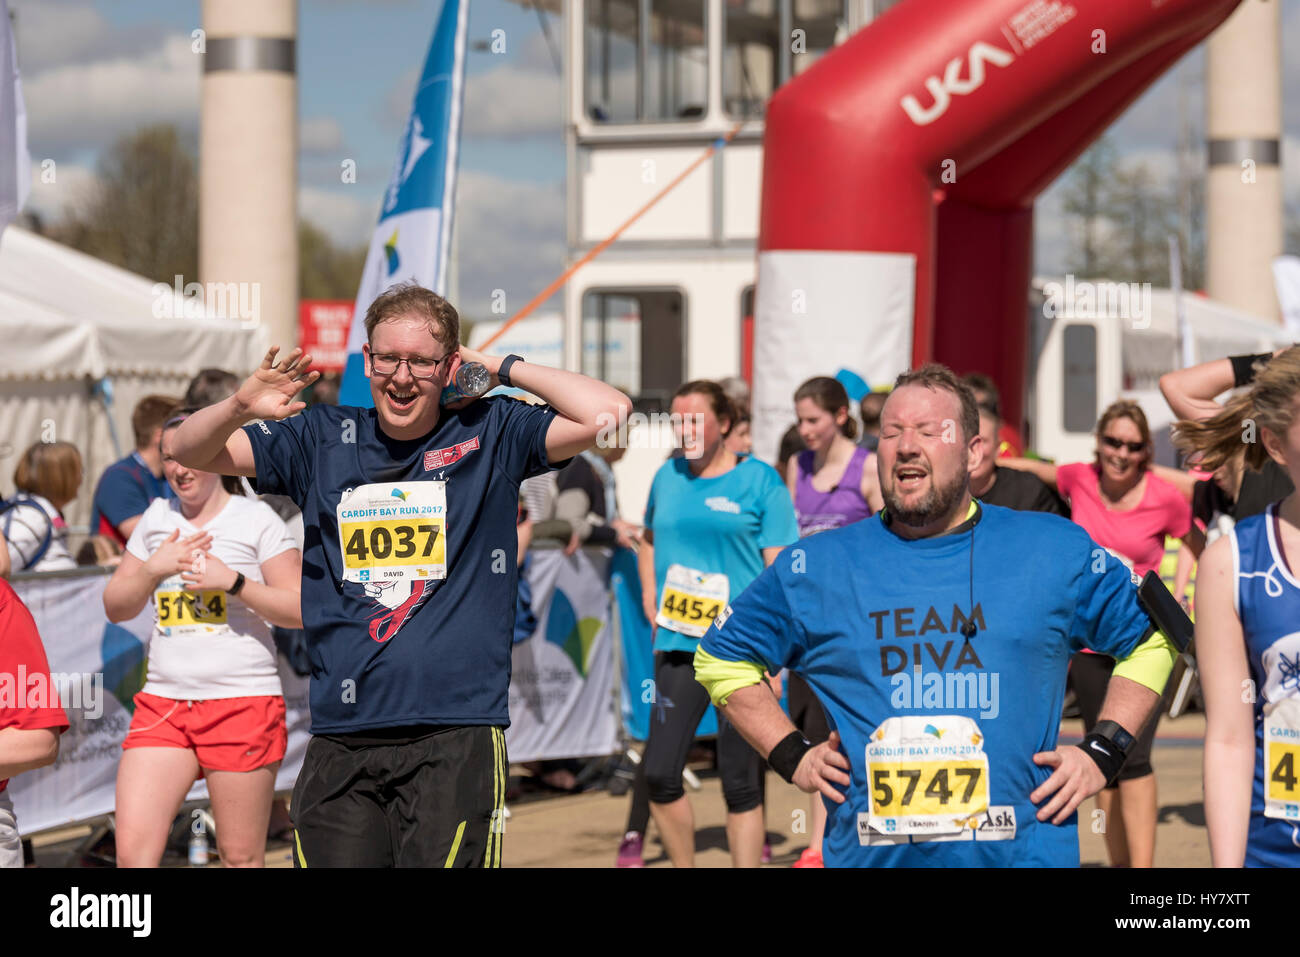 Cardiff, 2nd March 2017. Participants take part in the Cardiff Bay 10k ...